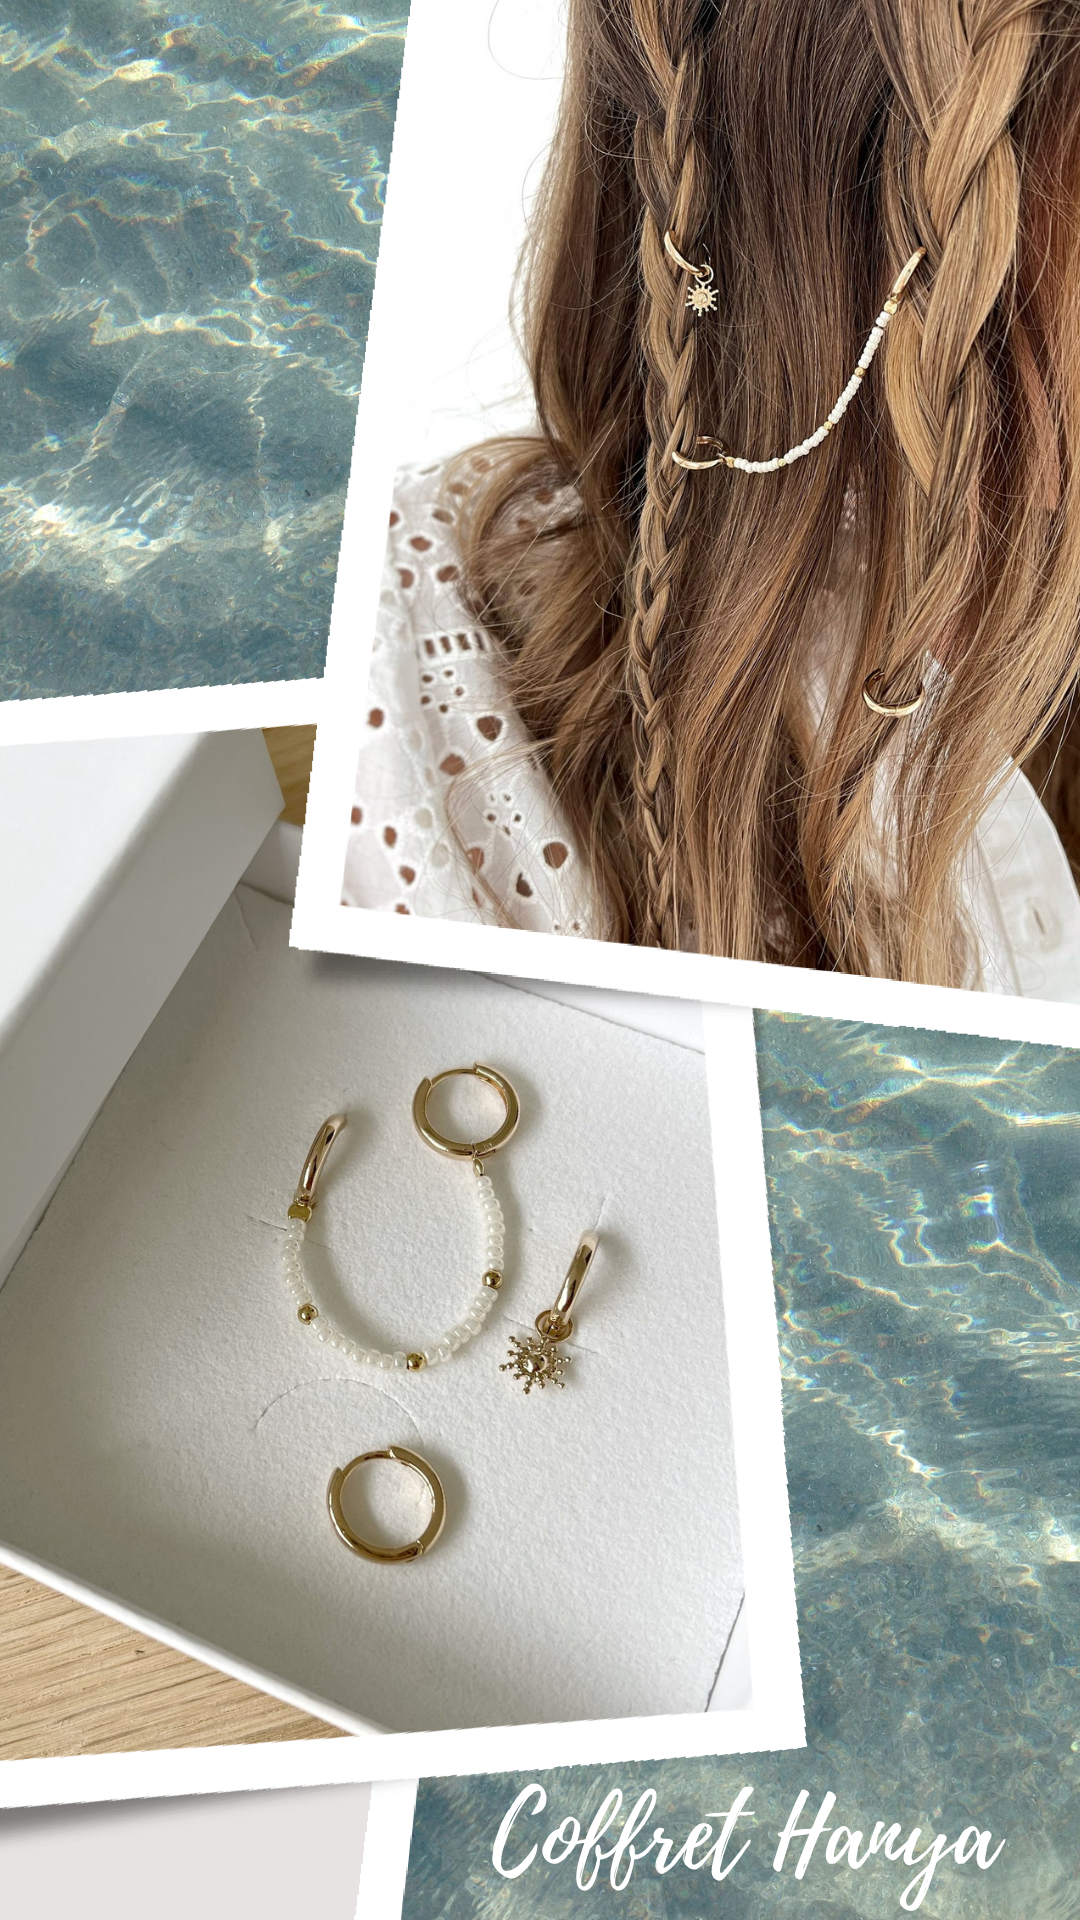 Trends | The must-have jewelry for your summer suitcase